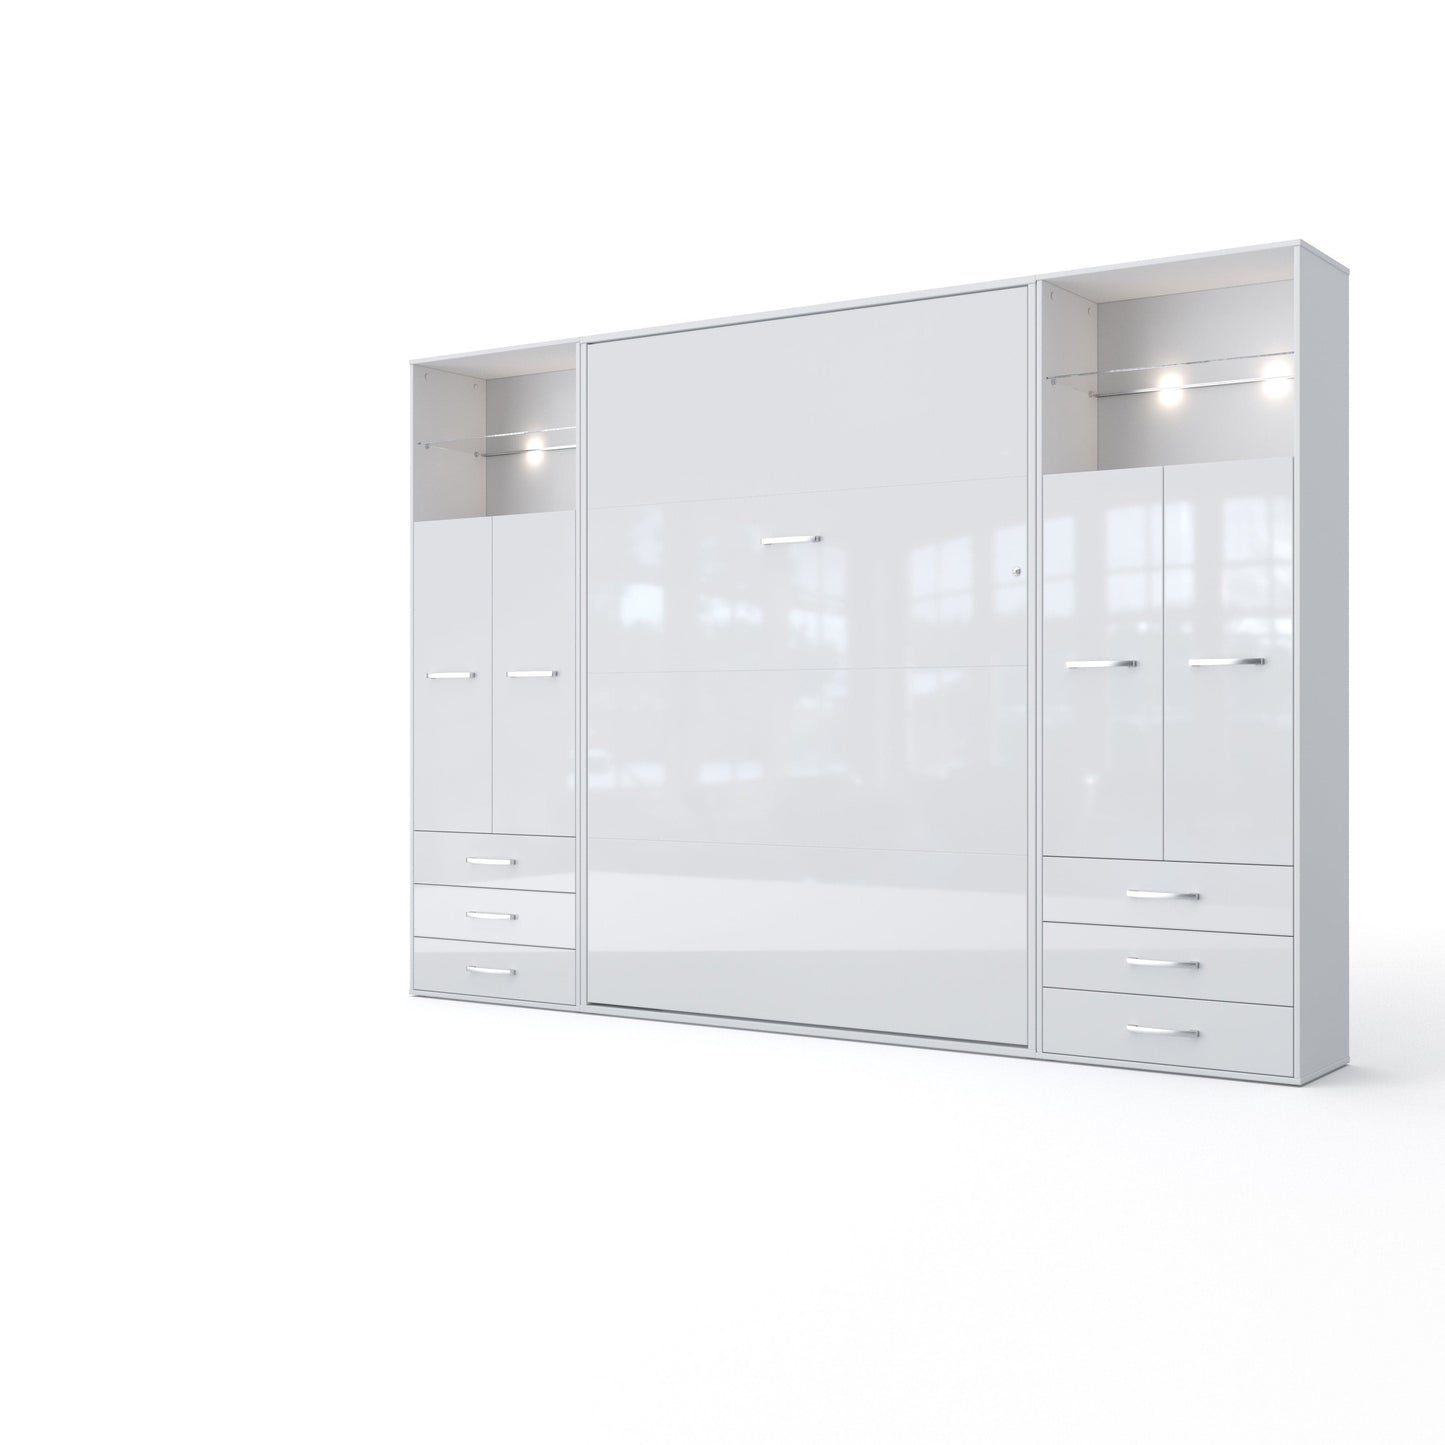 Invento Vertical Wall Bed, European Twin Size with 2 cabinets